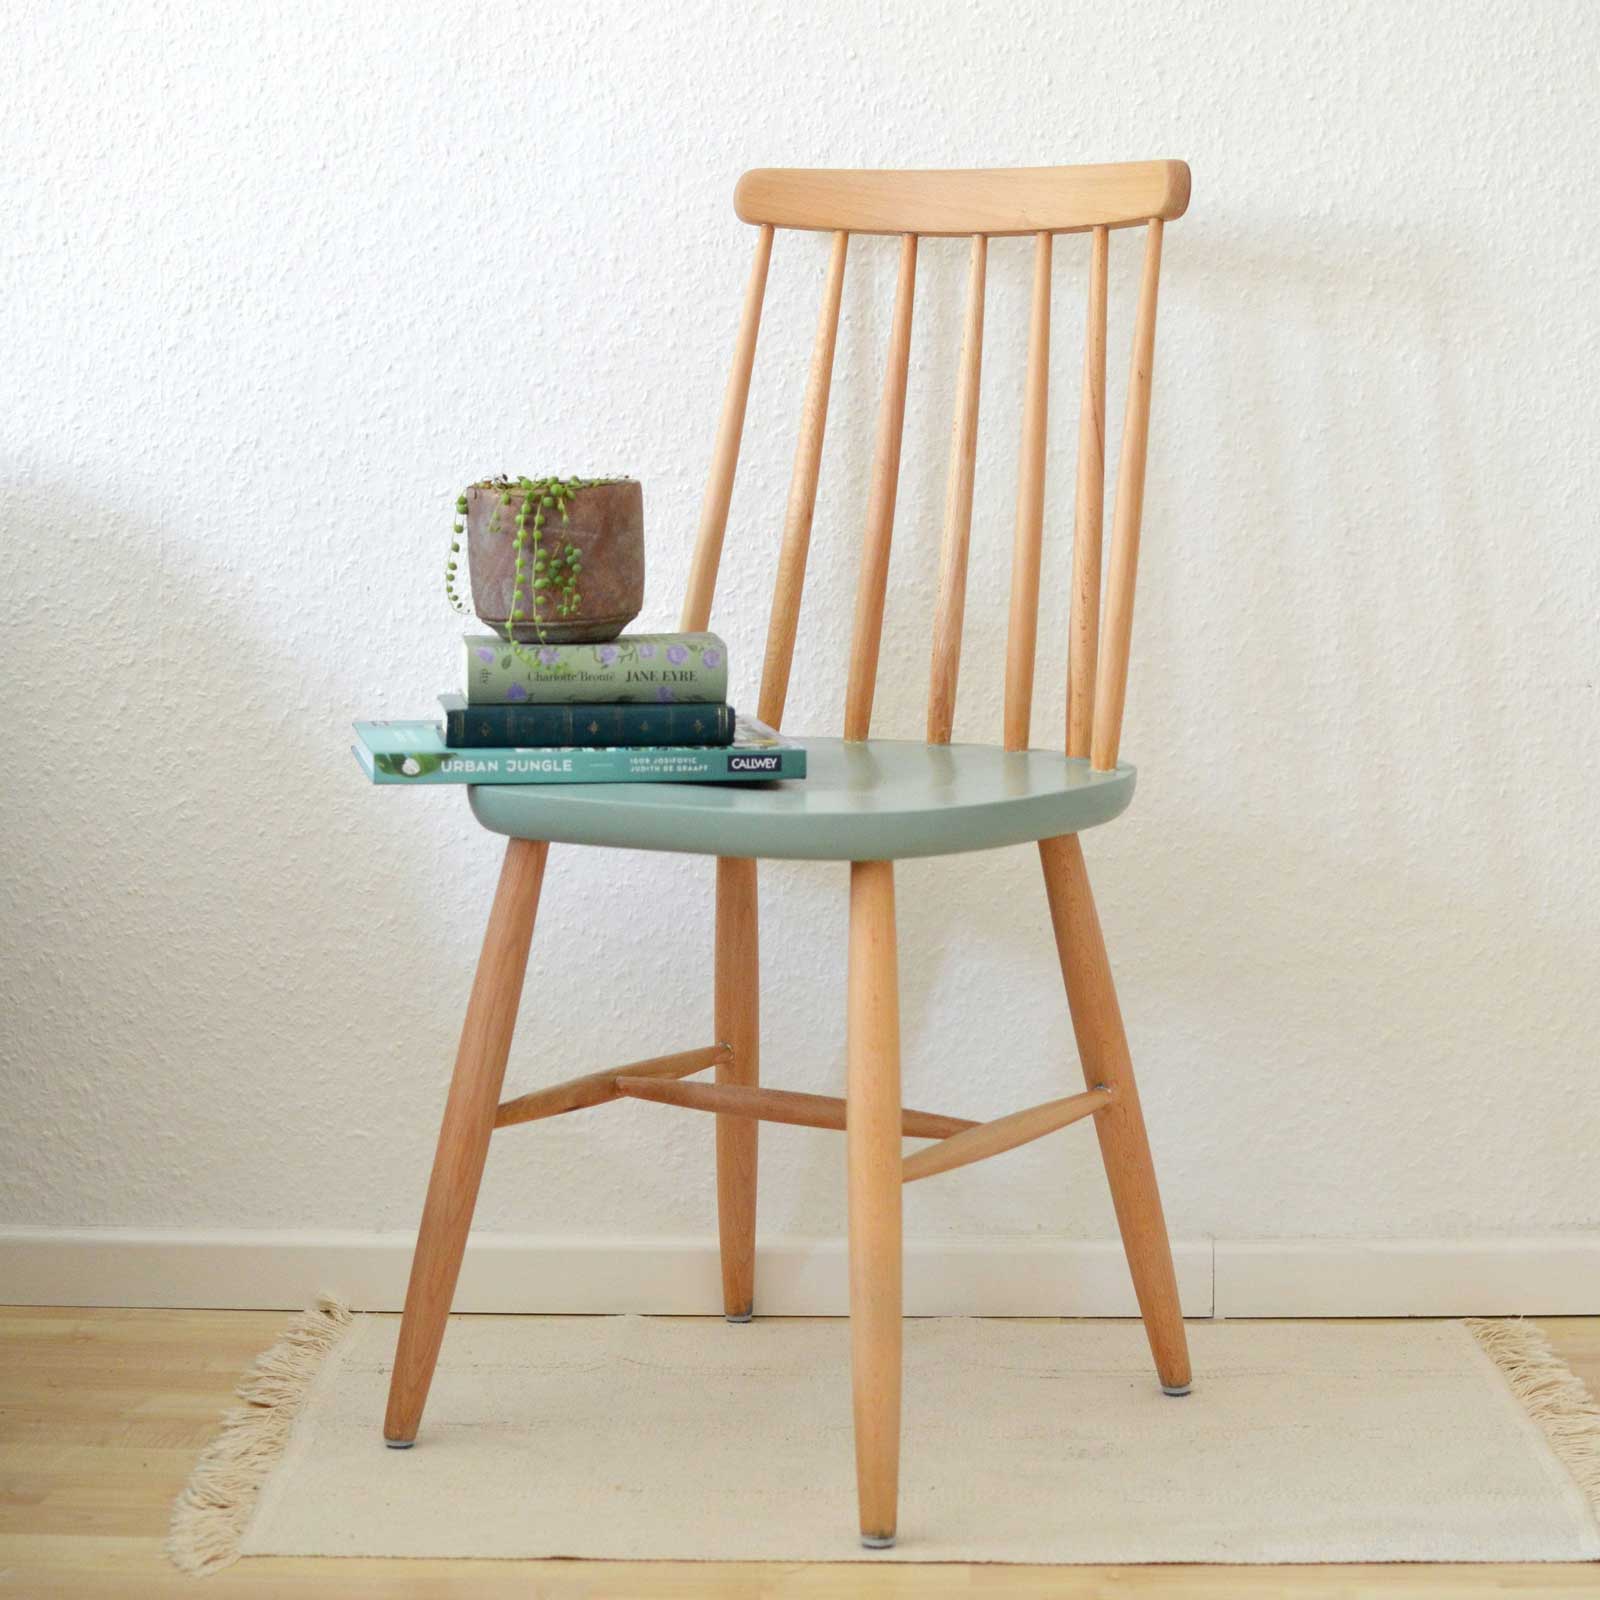 Wooden chair with books and a plant on the seat